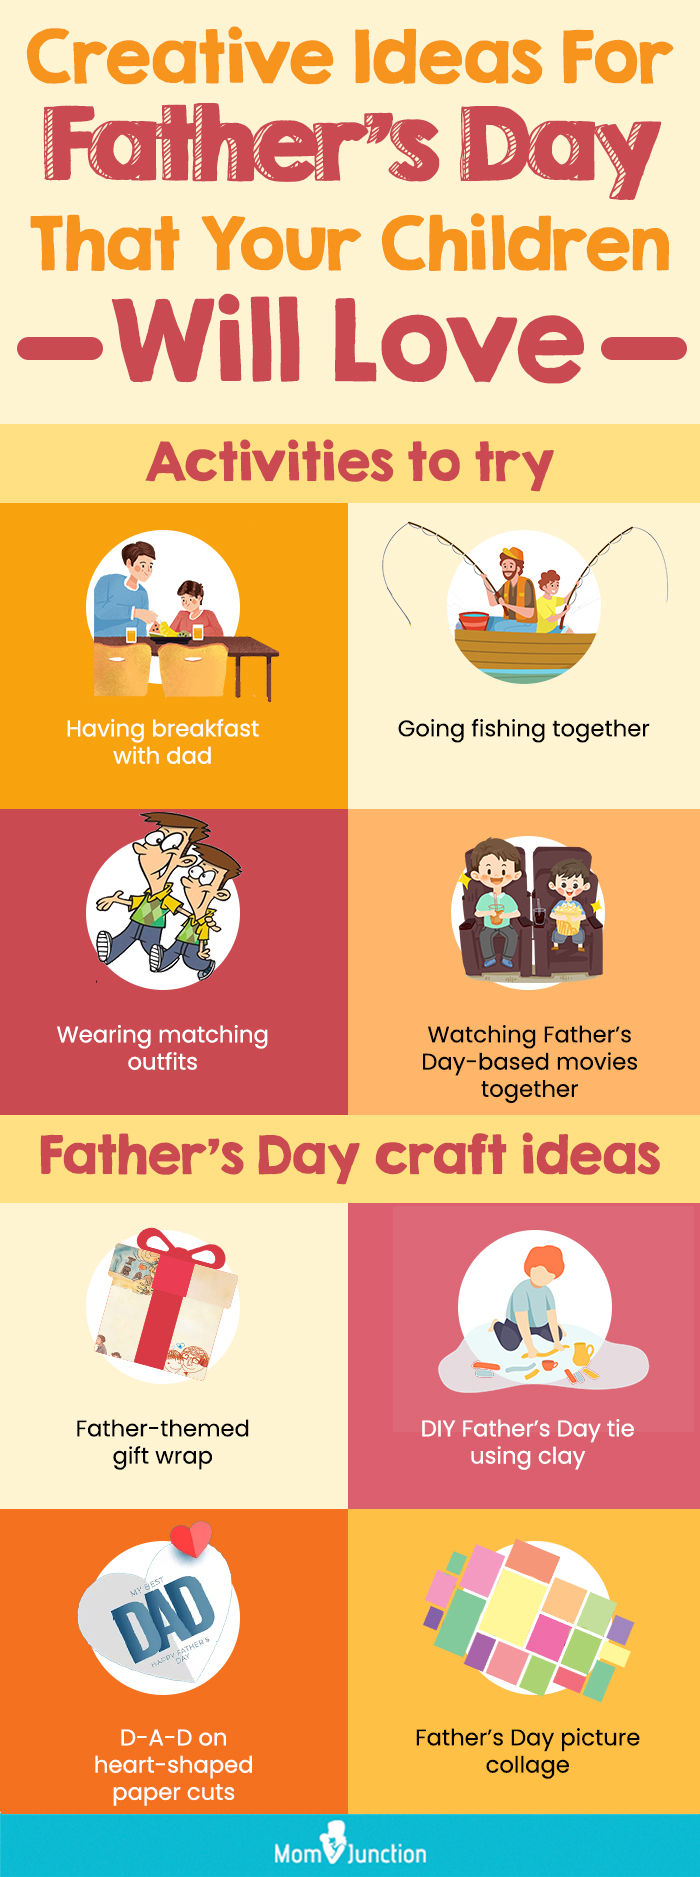 creative ideas for father s day that your children will love (infographic)